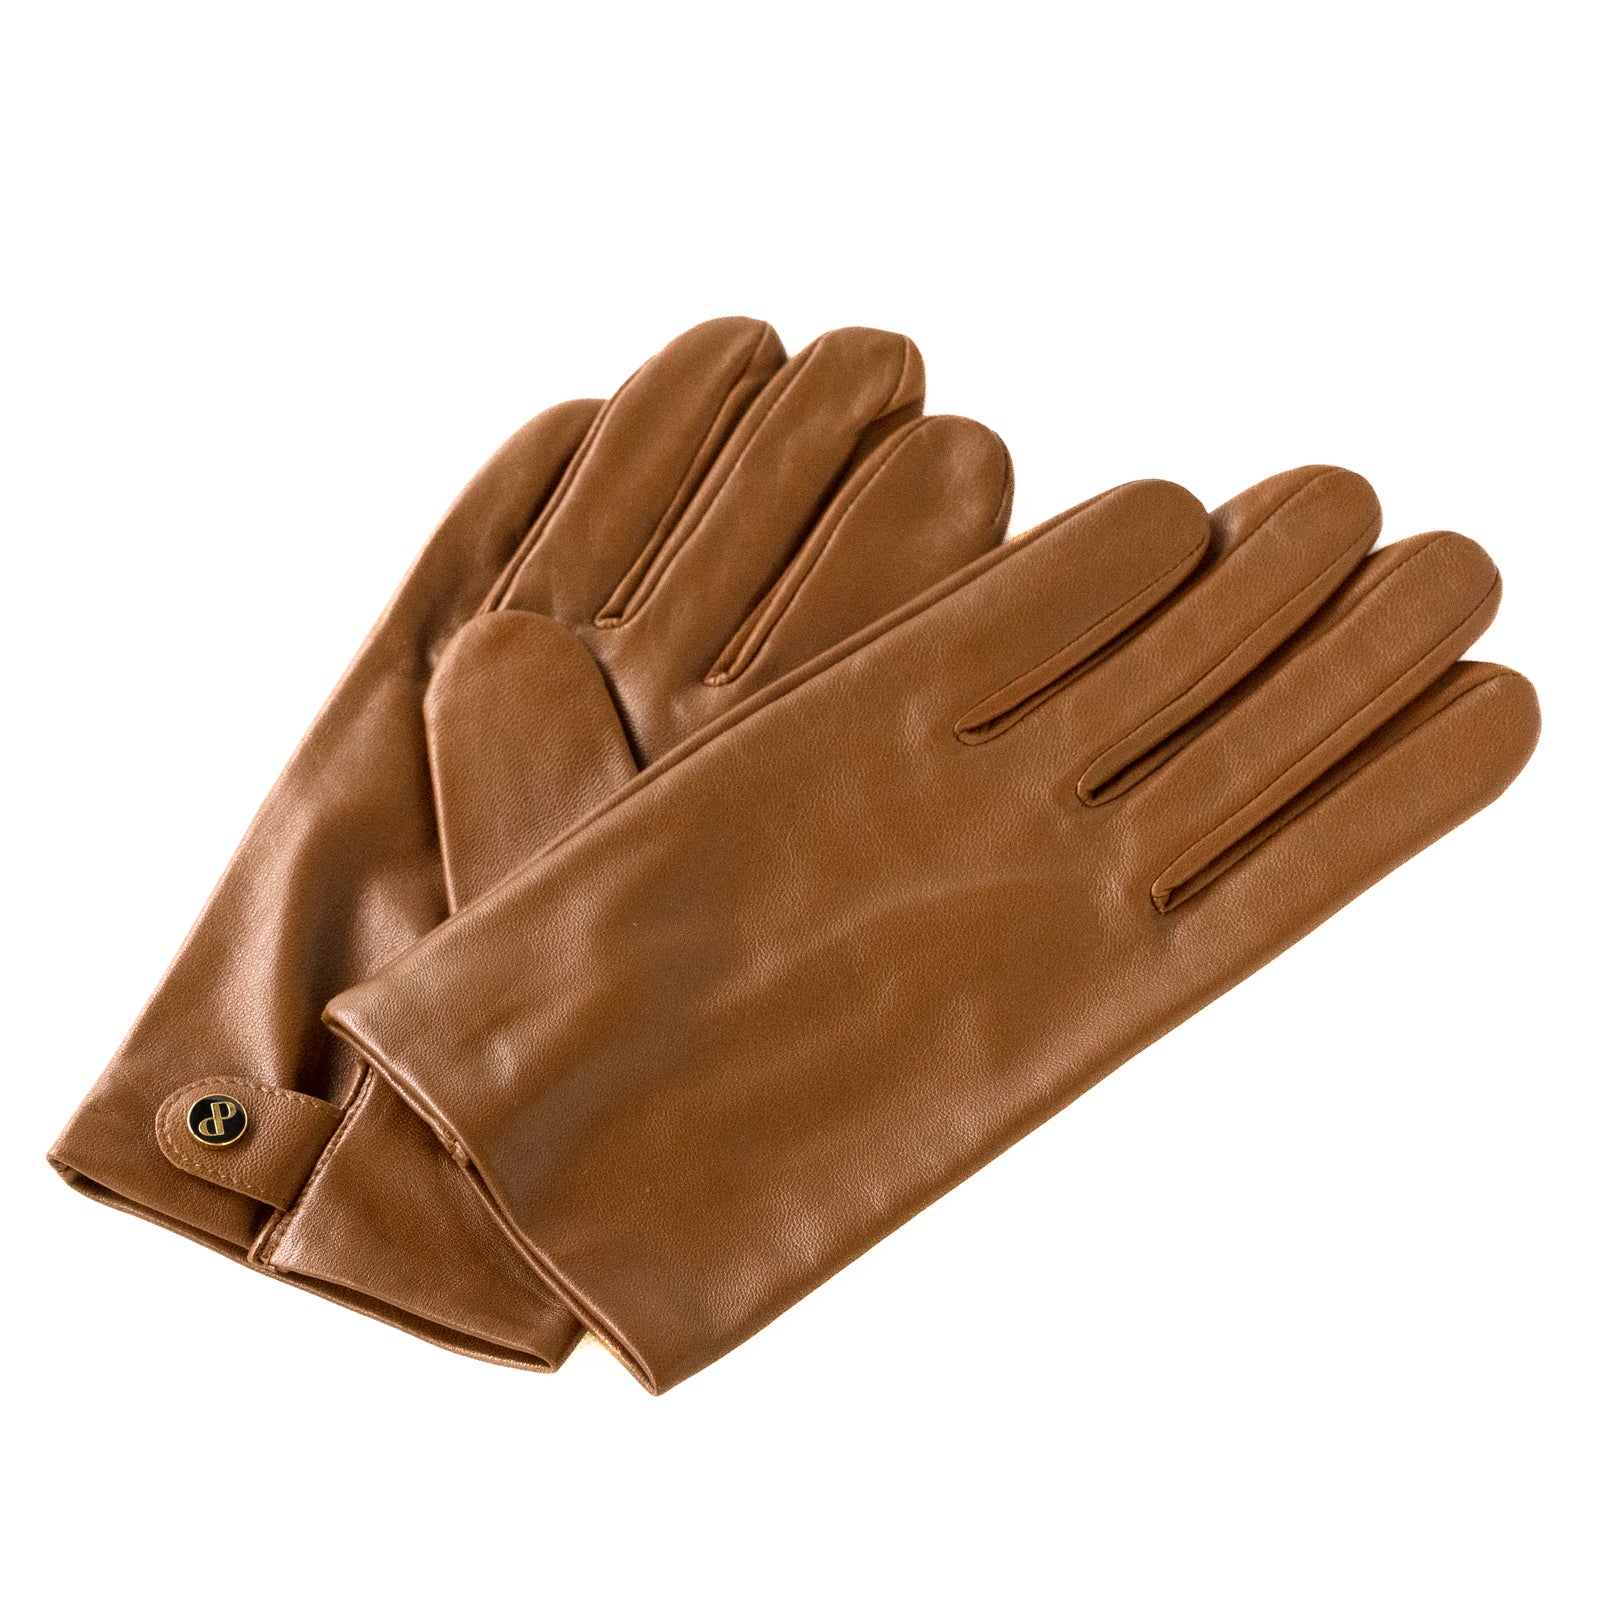 [Limited stock] Soft and elegant lamb leather gloves (men's)